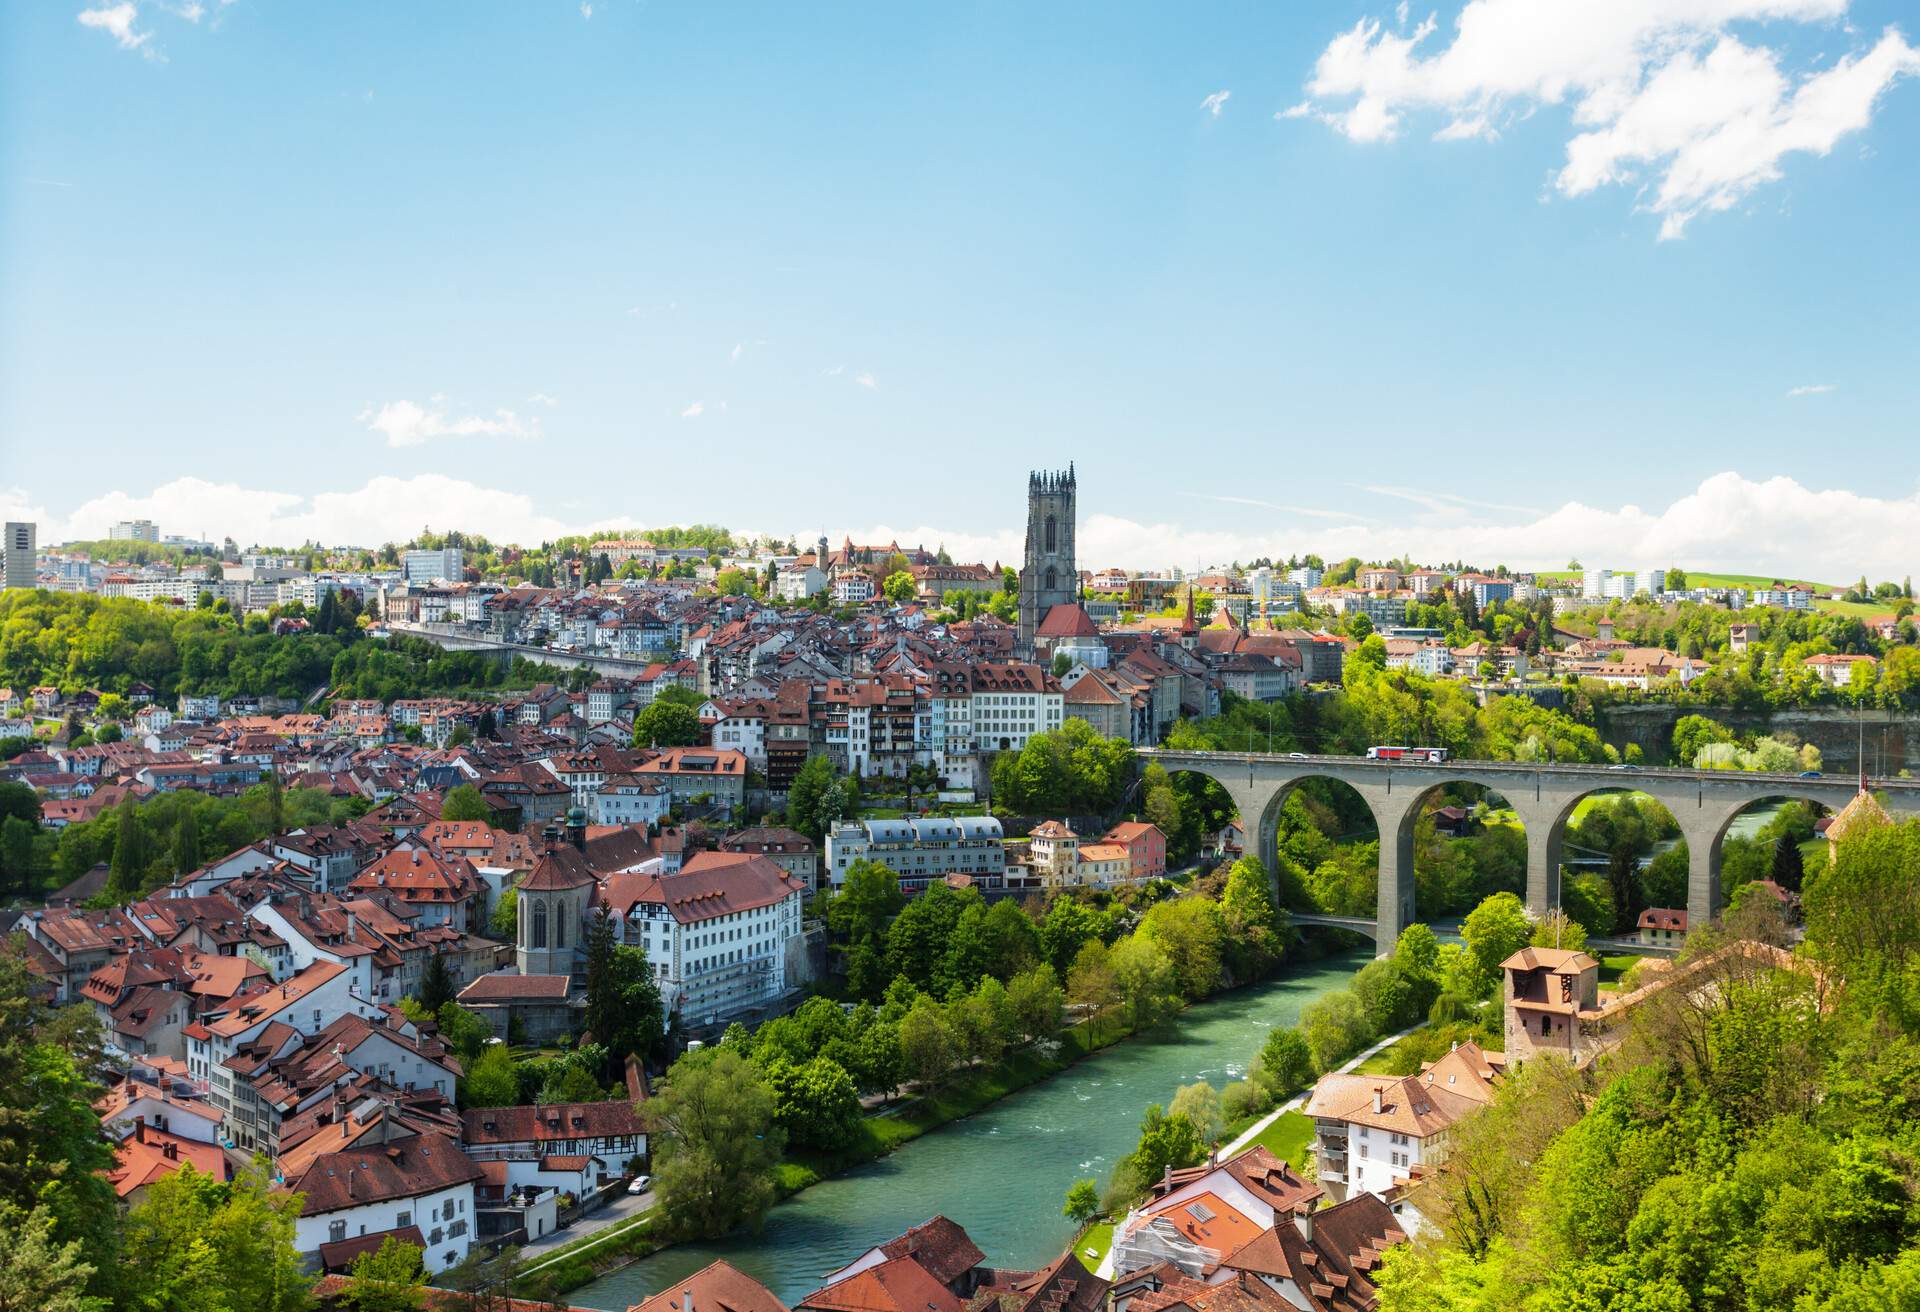 DEST_SWITZERLAND_FRIBOURG CITY_CITYSCAPE WITH THE CITY_GettyImages-180822290